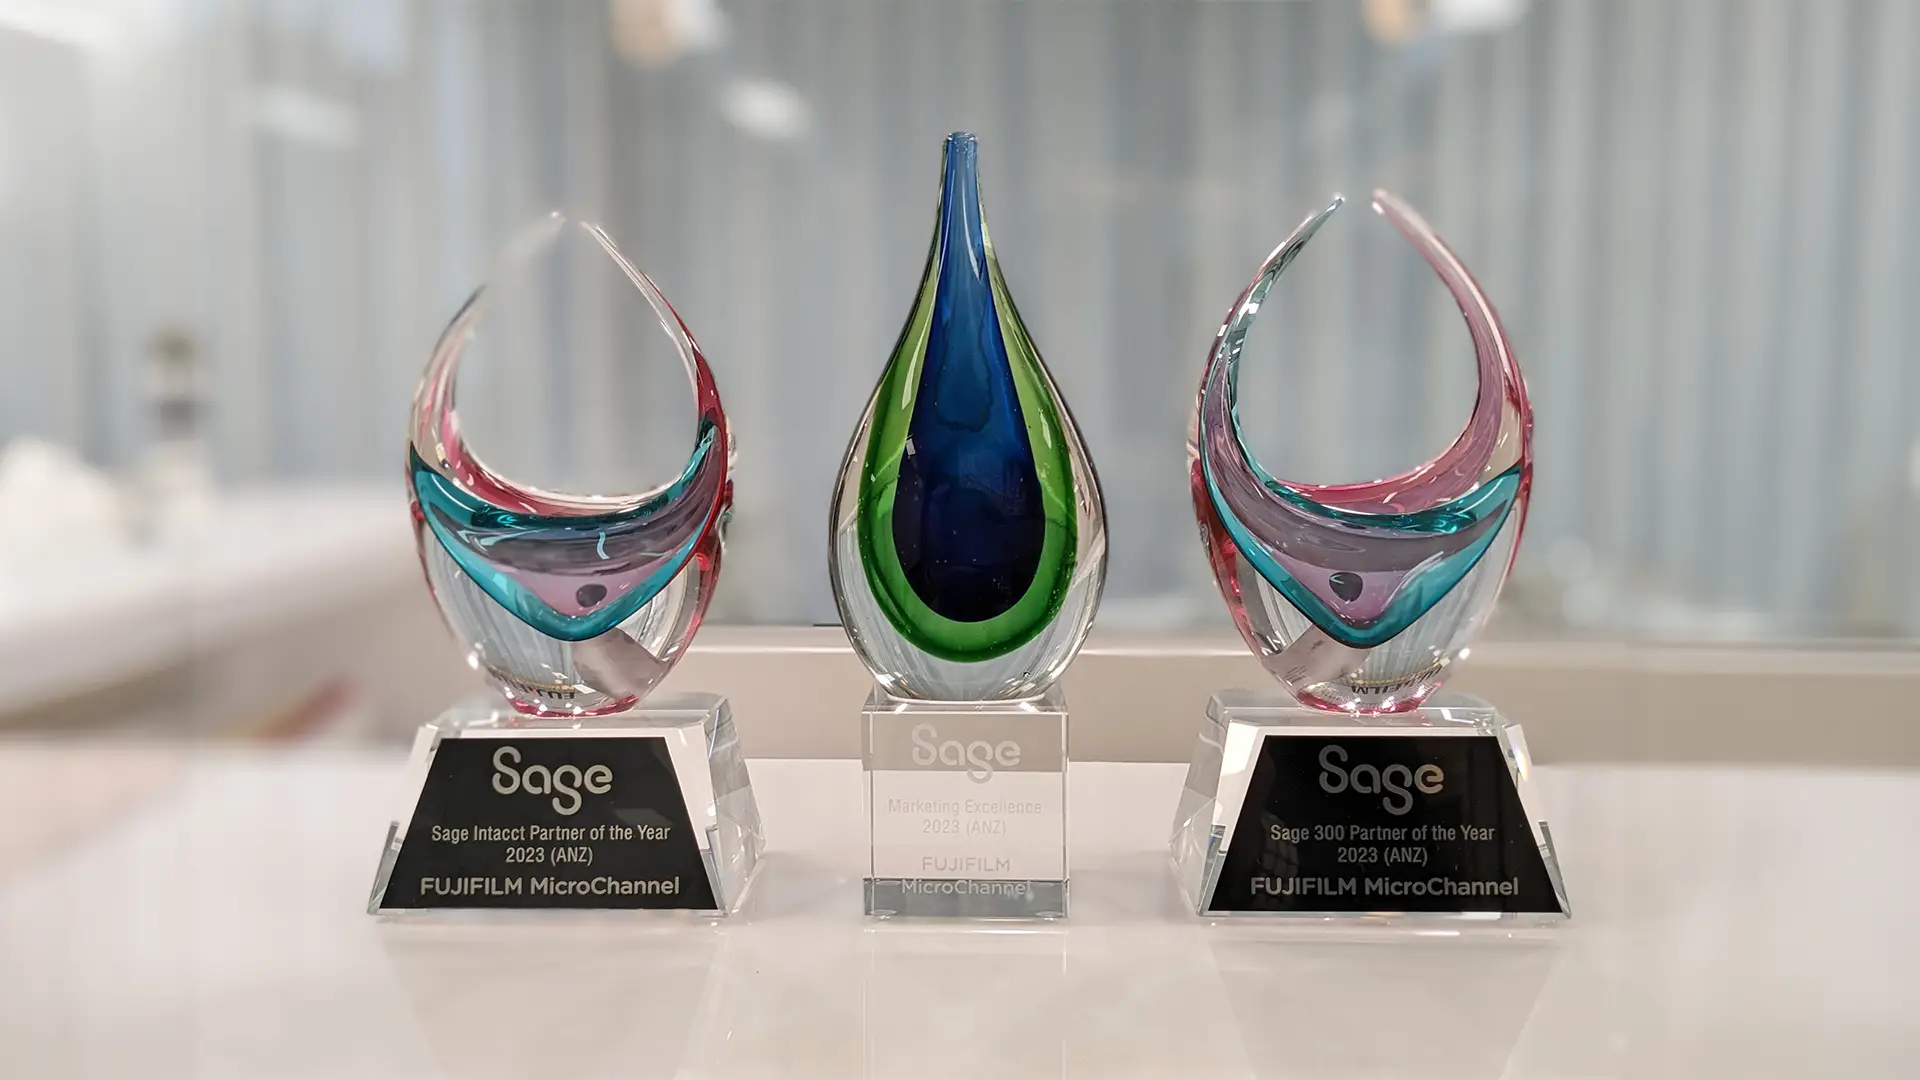 Three trophies presented to FUJIFILM MicroChanel from Sage